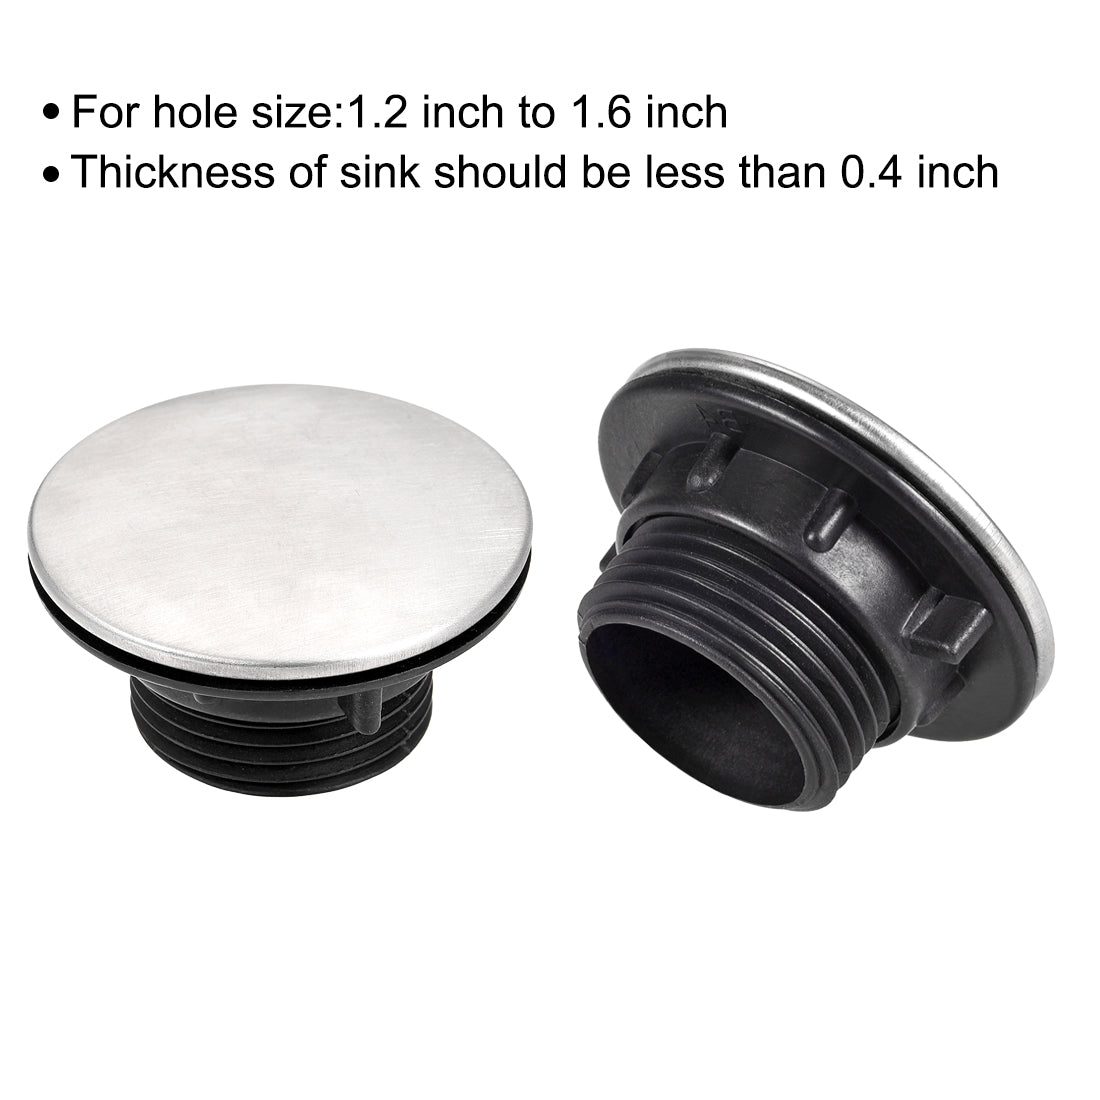 uxcell Uxcell Faucet Hole Cover for Dia 1.2 to 1.6 Inch, Kitchen Sink Tap Hole Cover Nickel Plated, 2 Pcs